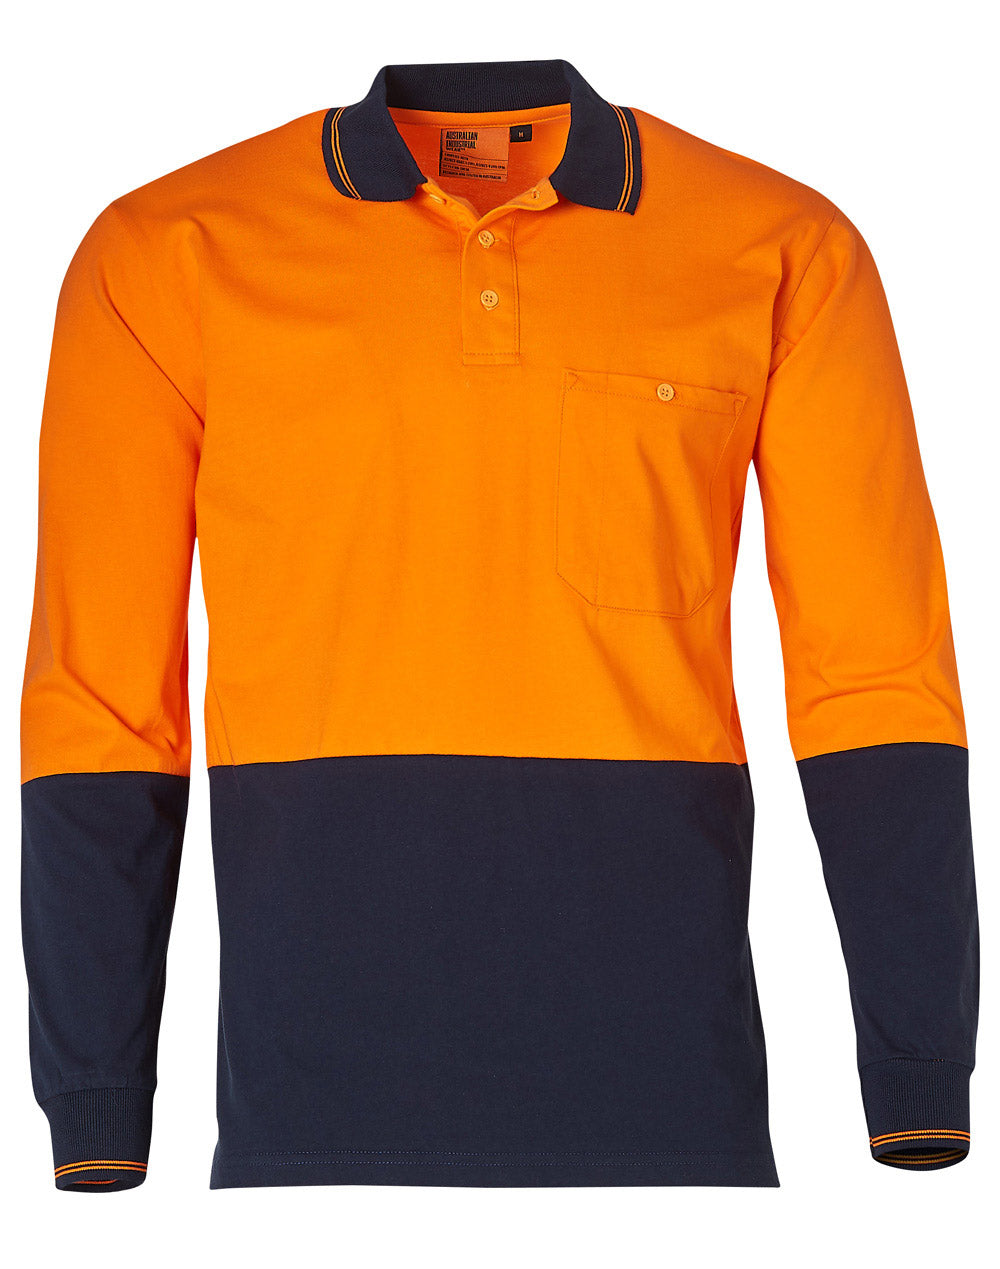 JCSW36 Cotton Jersey two tone Long Sleeve Safety Polo